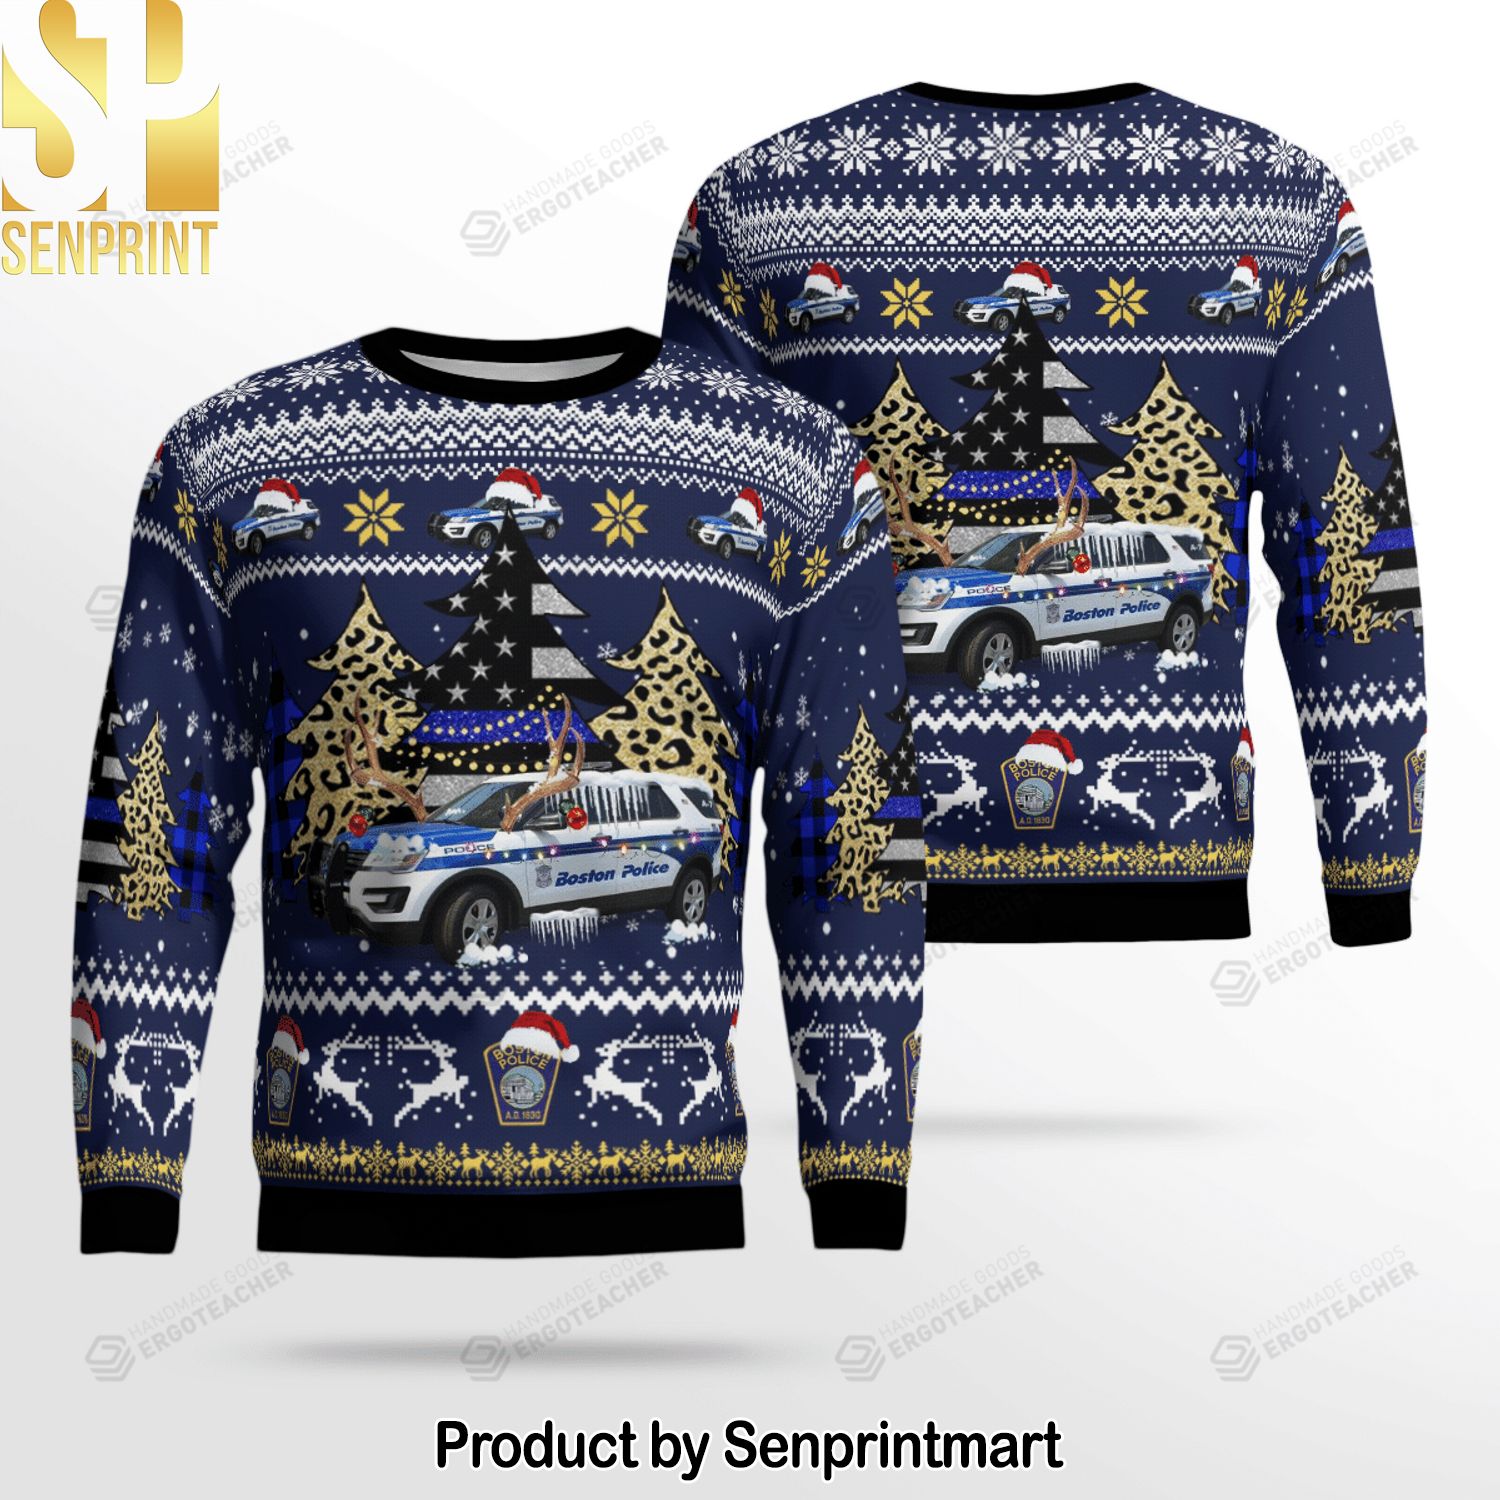 Boston Police Department Bpd Ford Police Interceptor Utility Ugly Christmas Sweater